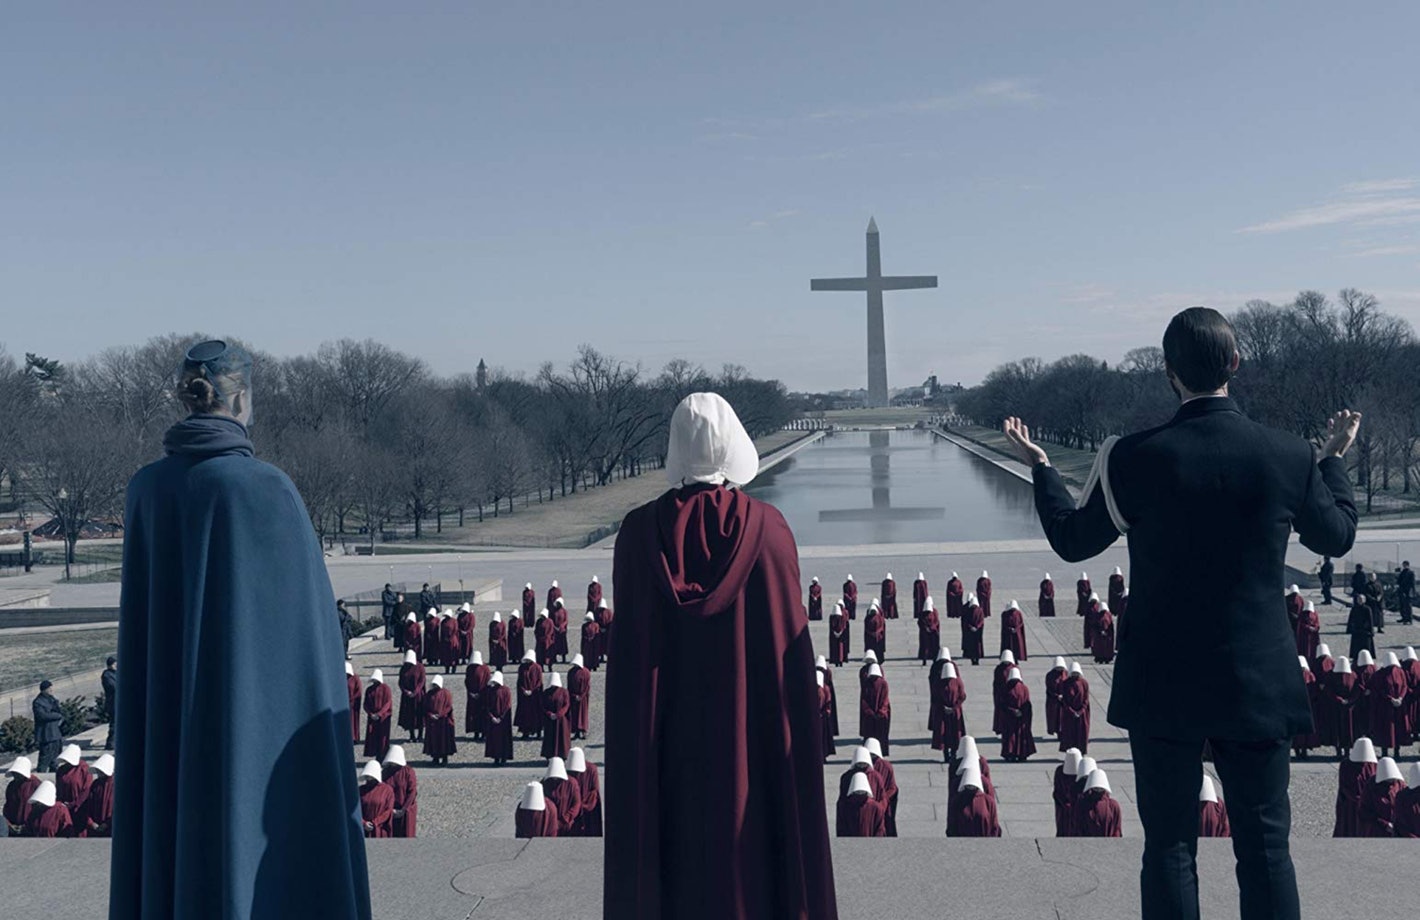 Serena Joy, June, and Fred Waterford begin leading prayer over other handmaids in Washington.